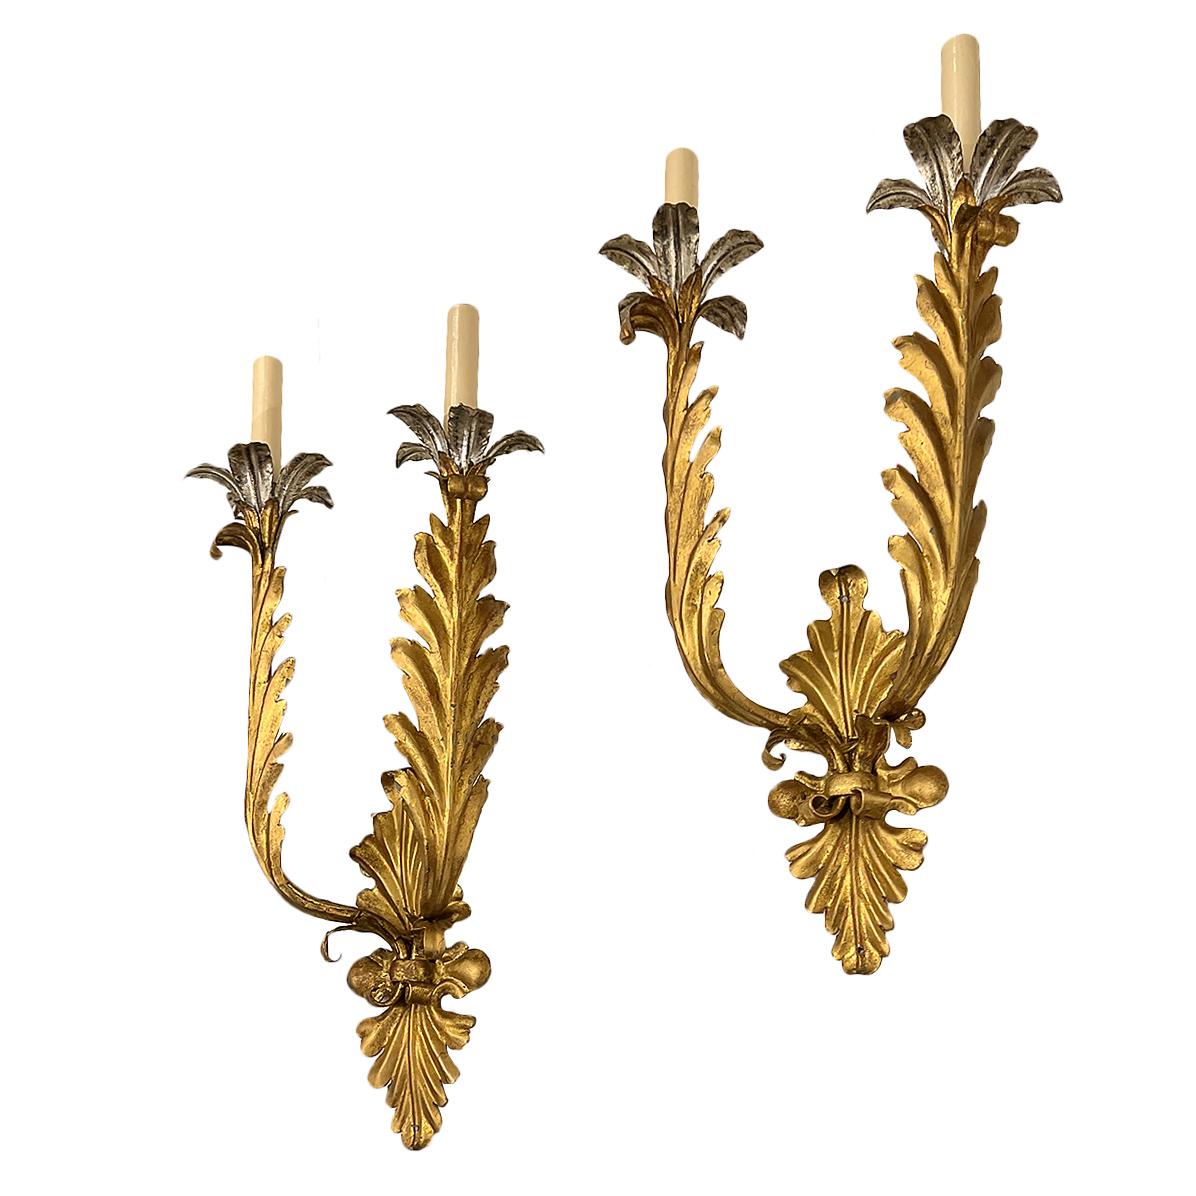 Pair of circa 1920's Italian double light sconces with gilt and silver finish.

Measurements:
Height: 18